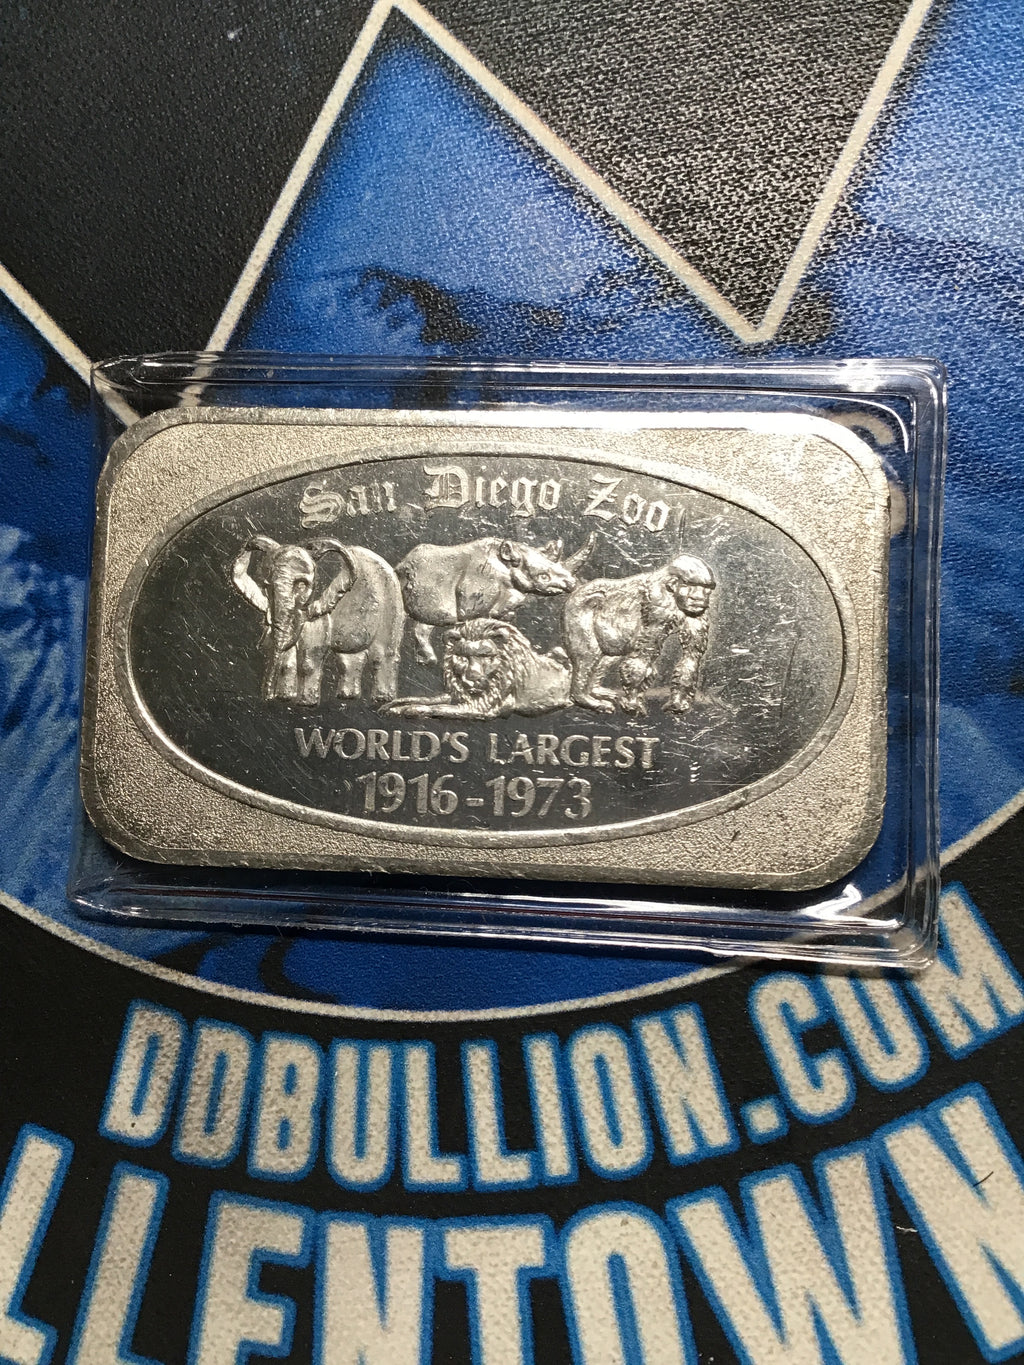 1973 United States Silver Corp. San Diego Zoo Silver Bar